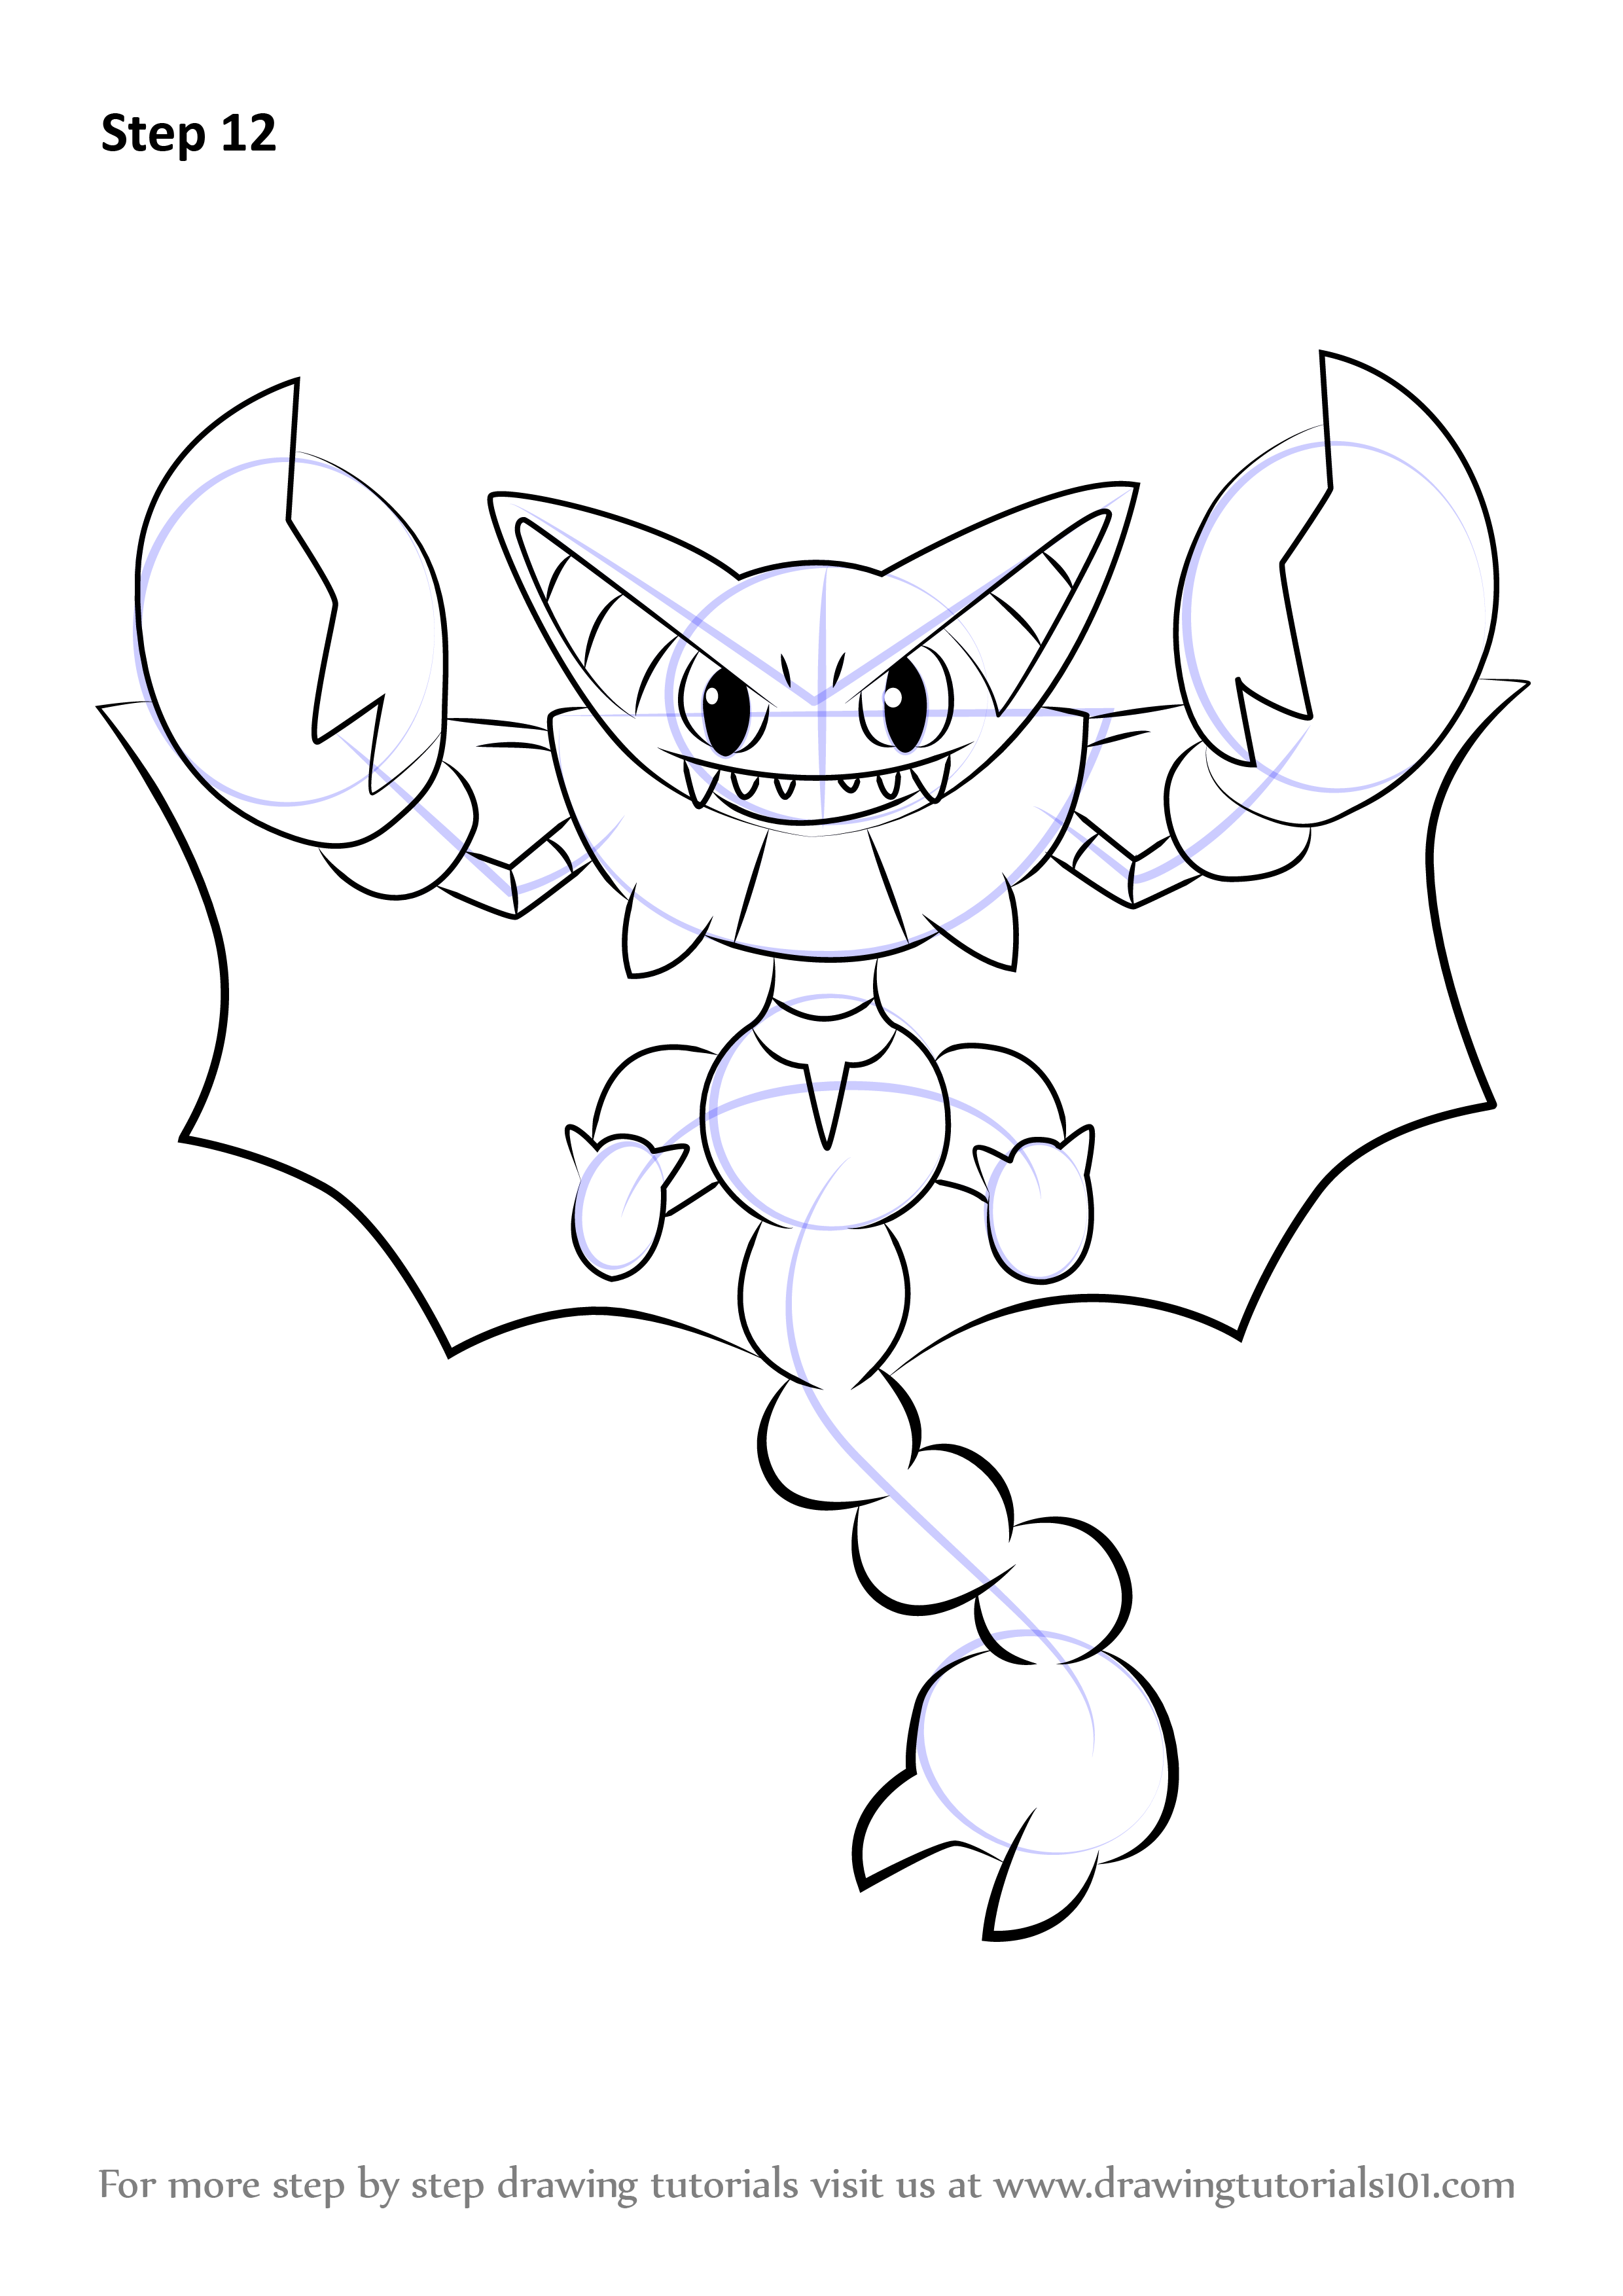 Learn How to Draw Gliscor from Pokemon (Pokemon) Step by Step : Drawing